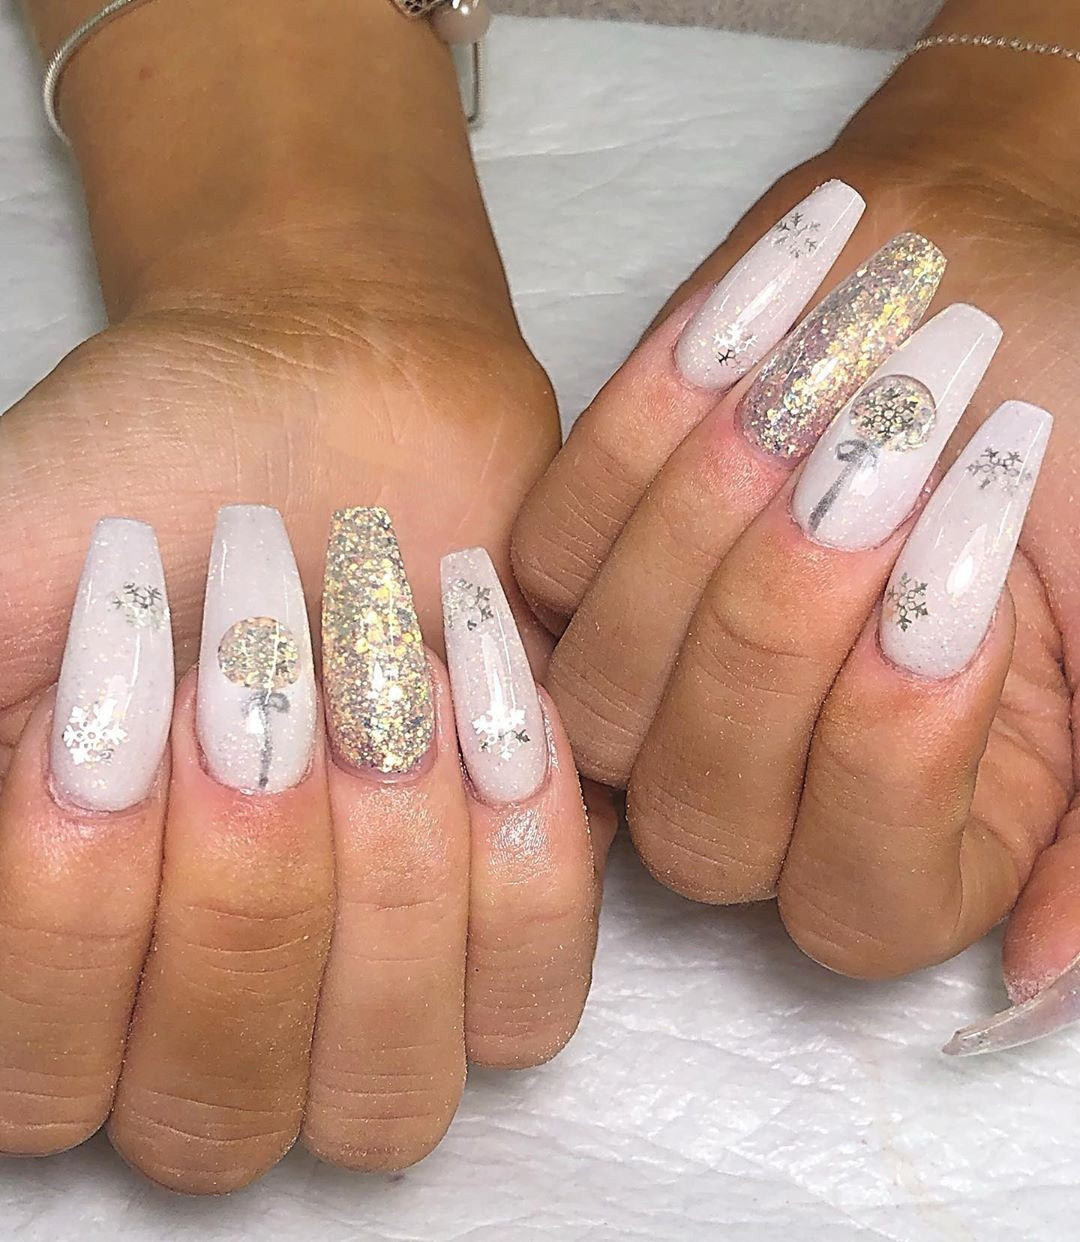 50 Acrylic Nail Designs to Fascinate Your Admirers,acrylic nail ideas 2020,acrylic nail ideas coffin,acrylic nail designs for summer